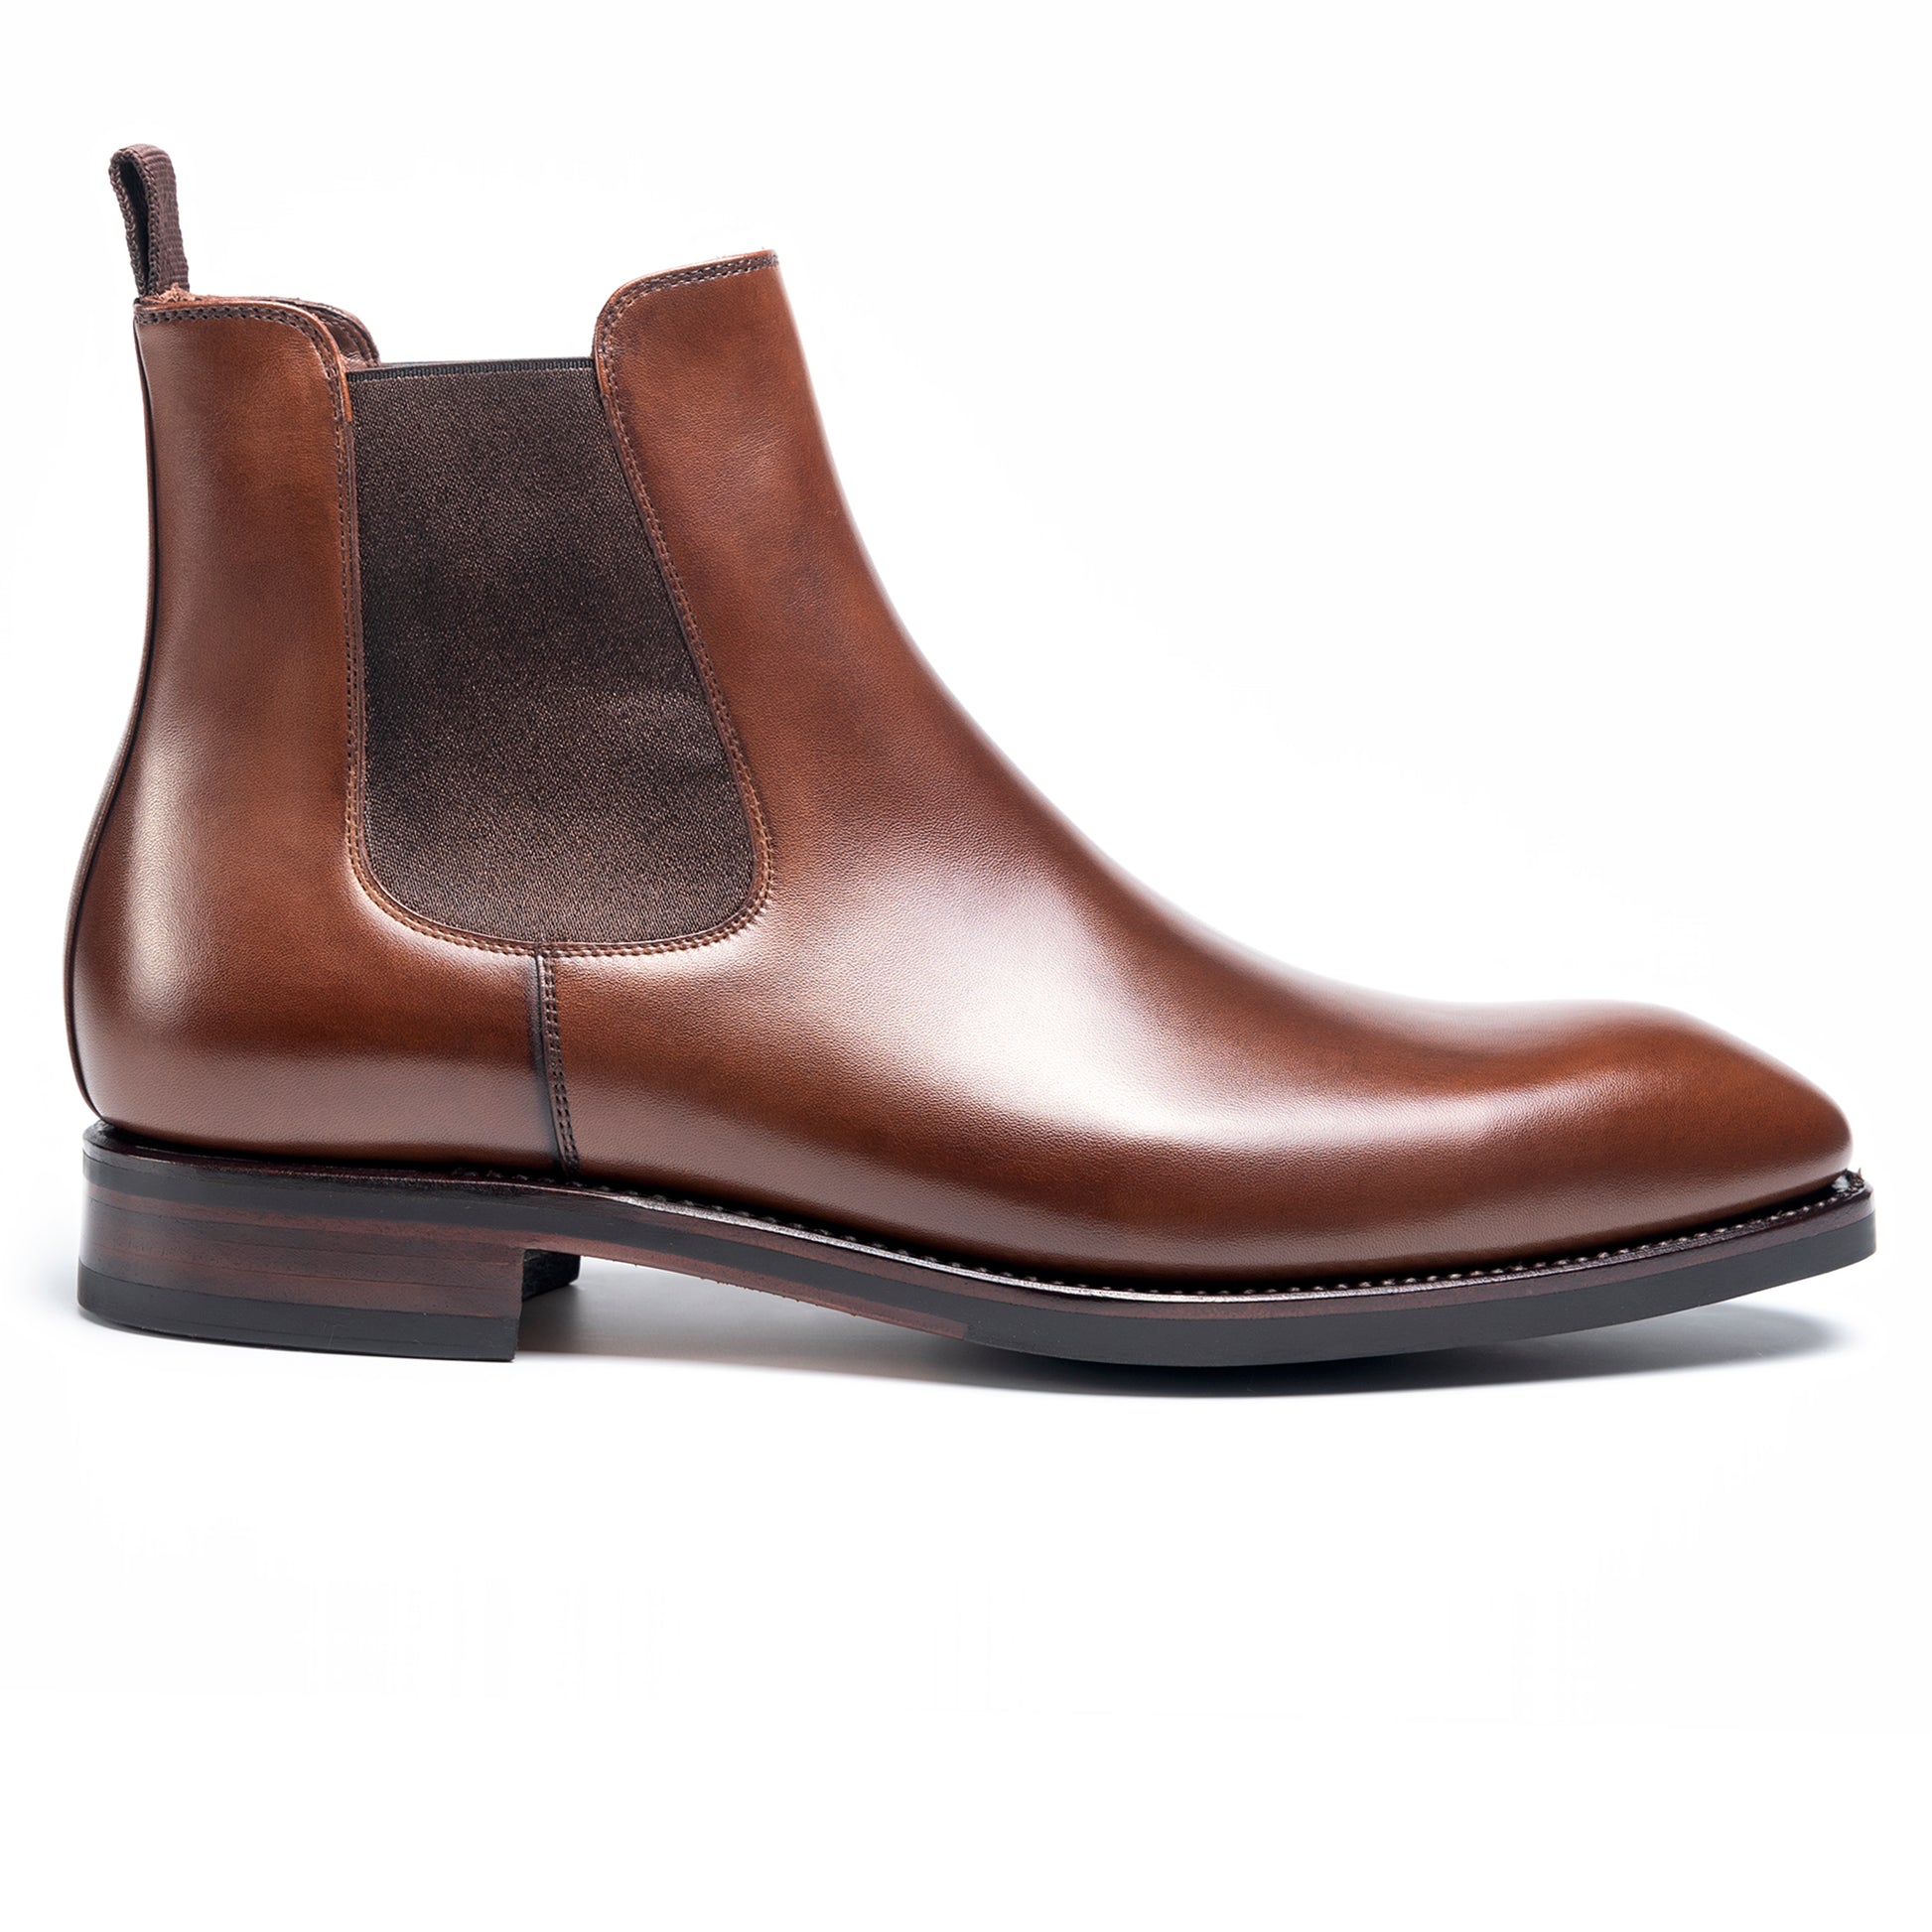 LV Discovery Ankle Boot - Men - Shoes